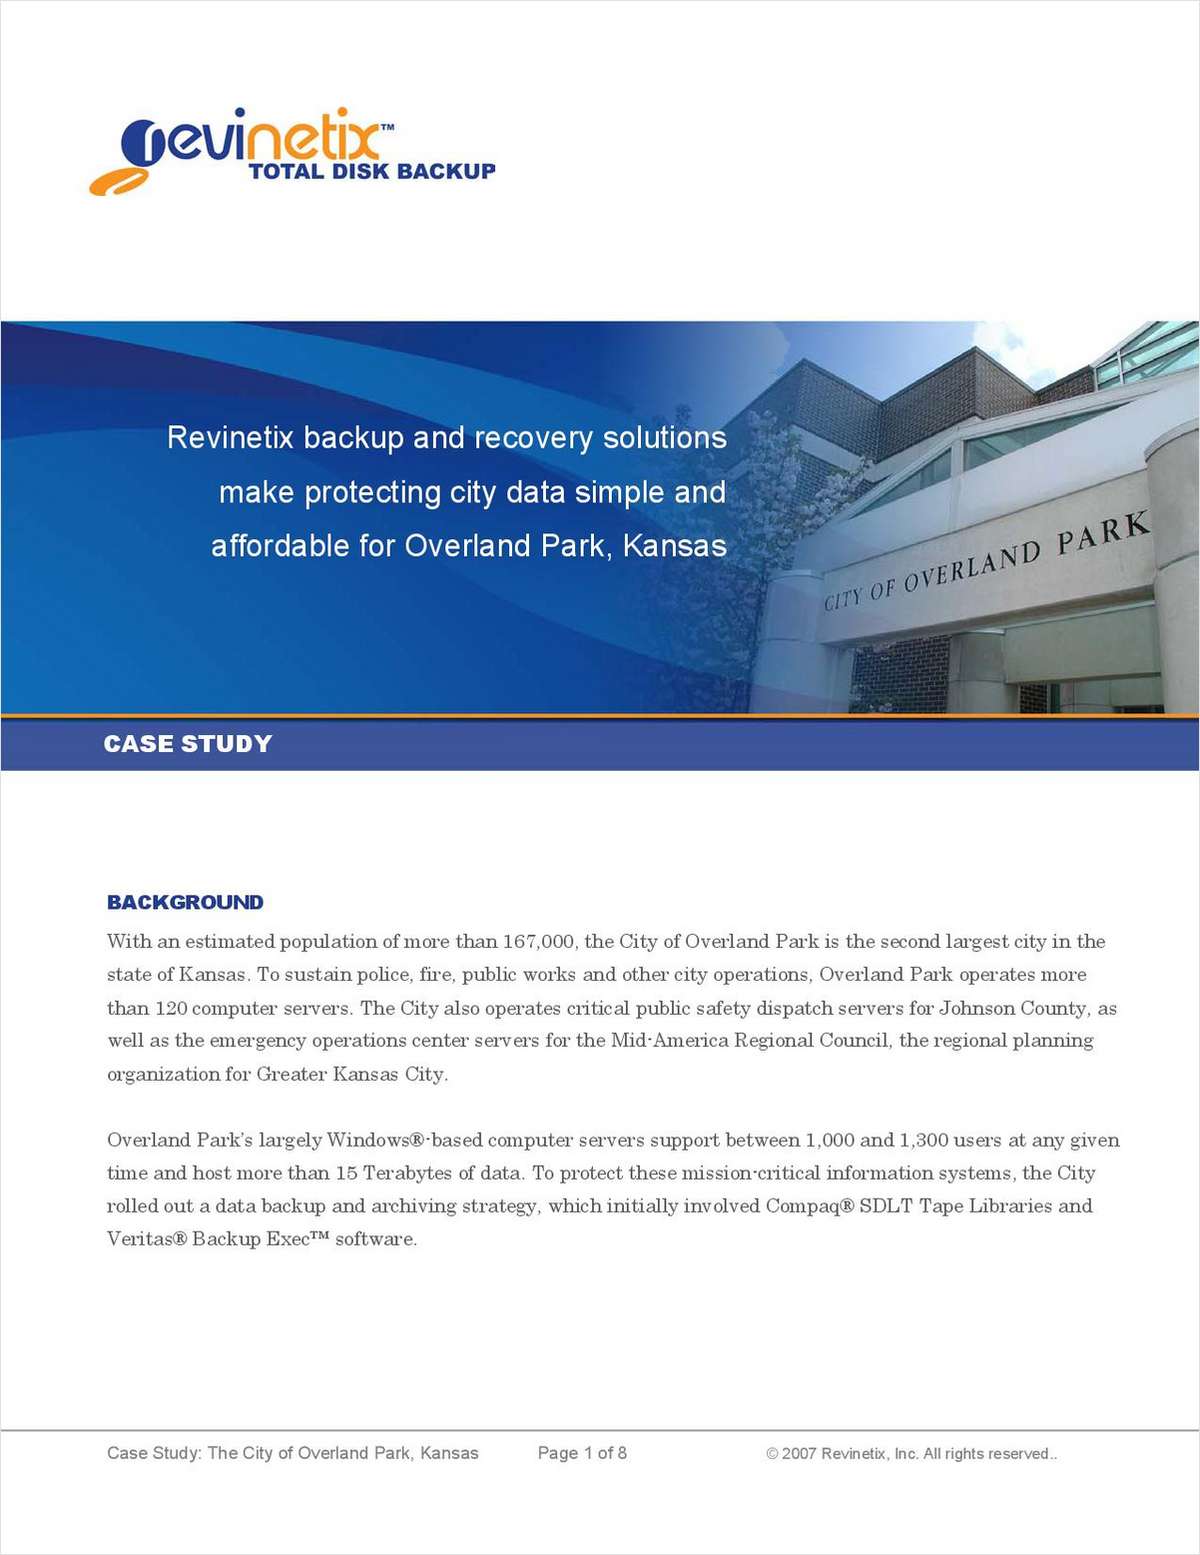 Revinetix backup and recovery solutions make protecting city data simple and affordable for Overland Park, Kansas